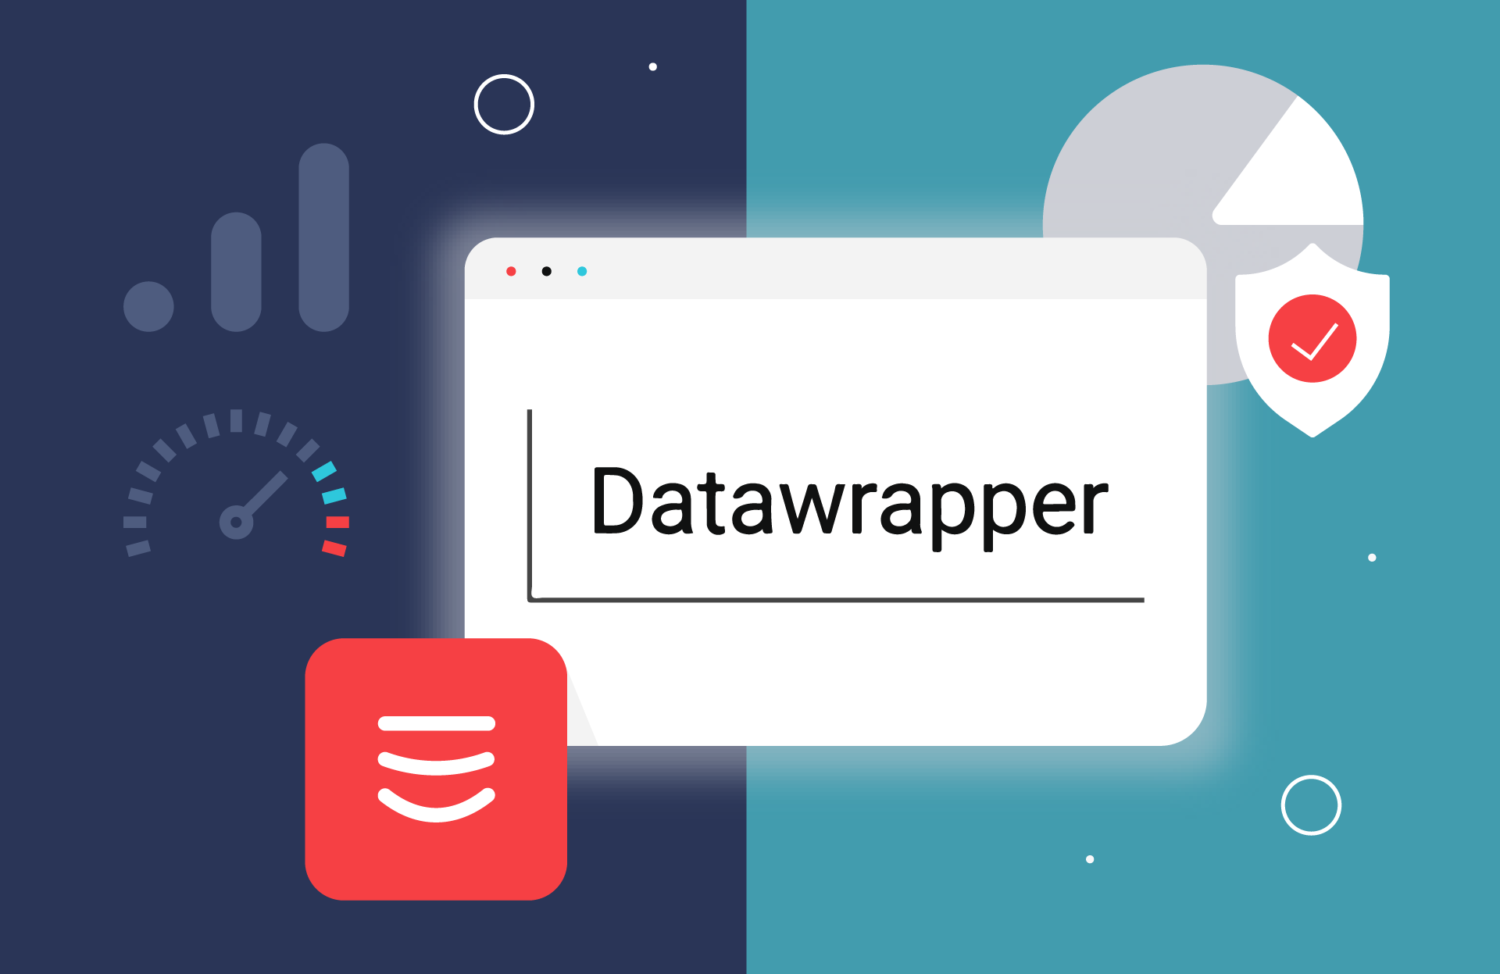 Datawrapper achieves 275% faster page load speed and bulletproof security by moving to Strattic